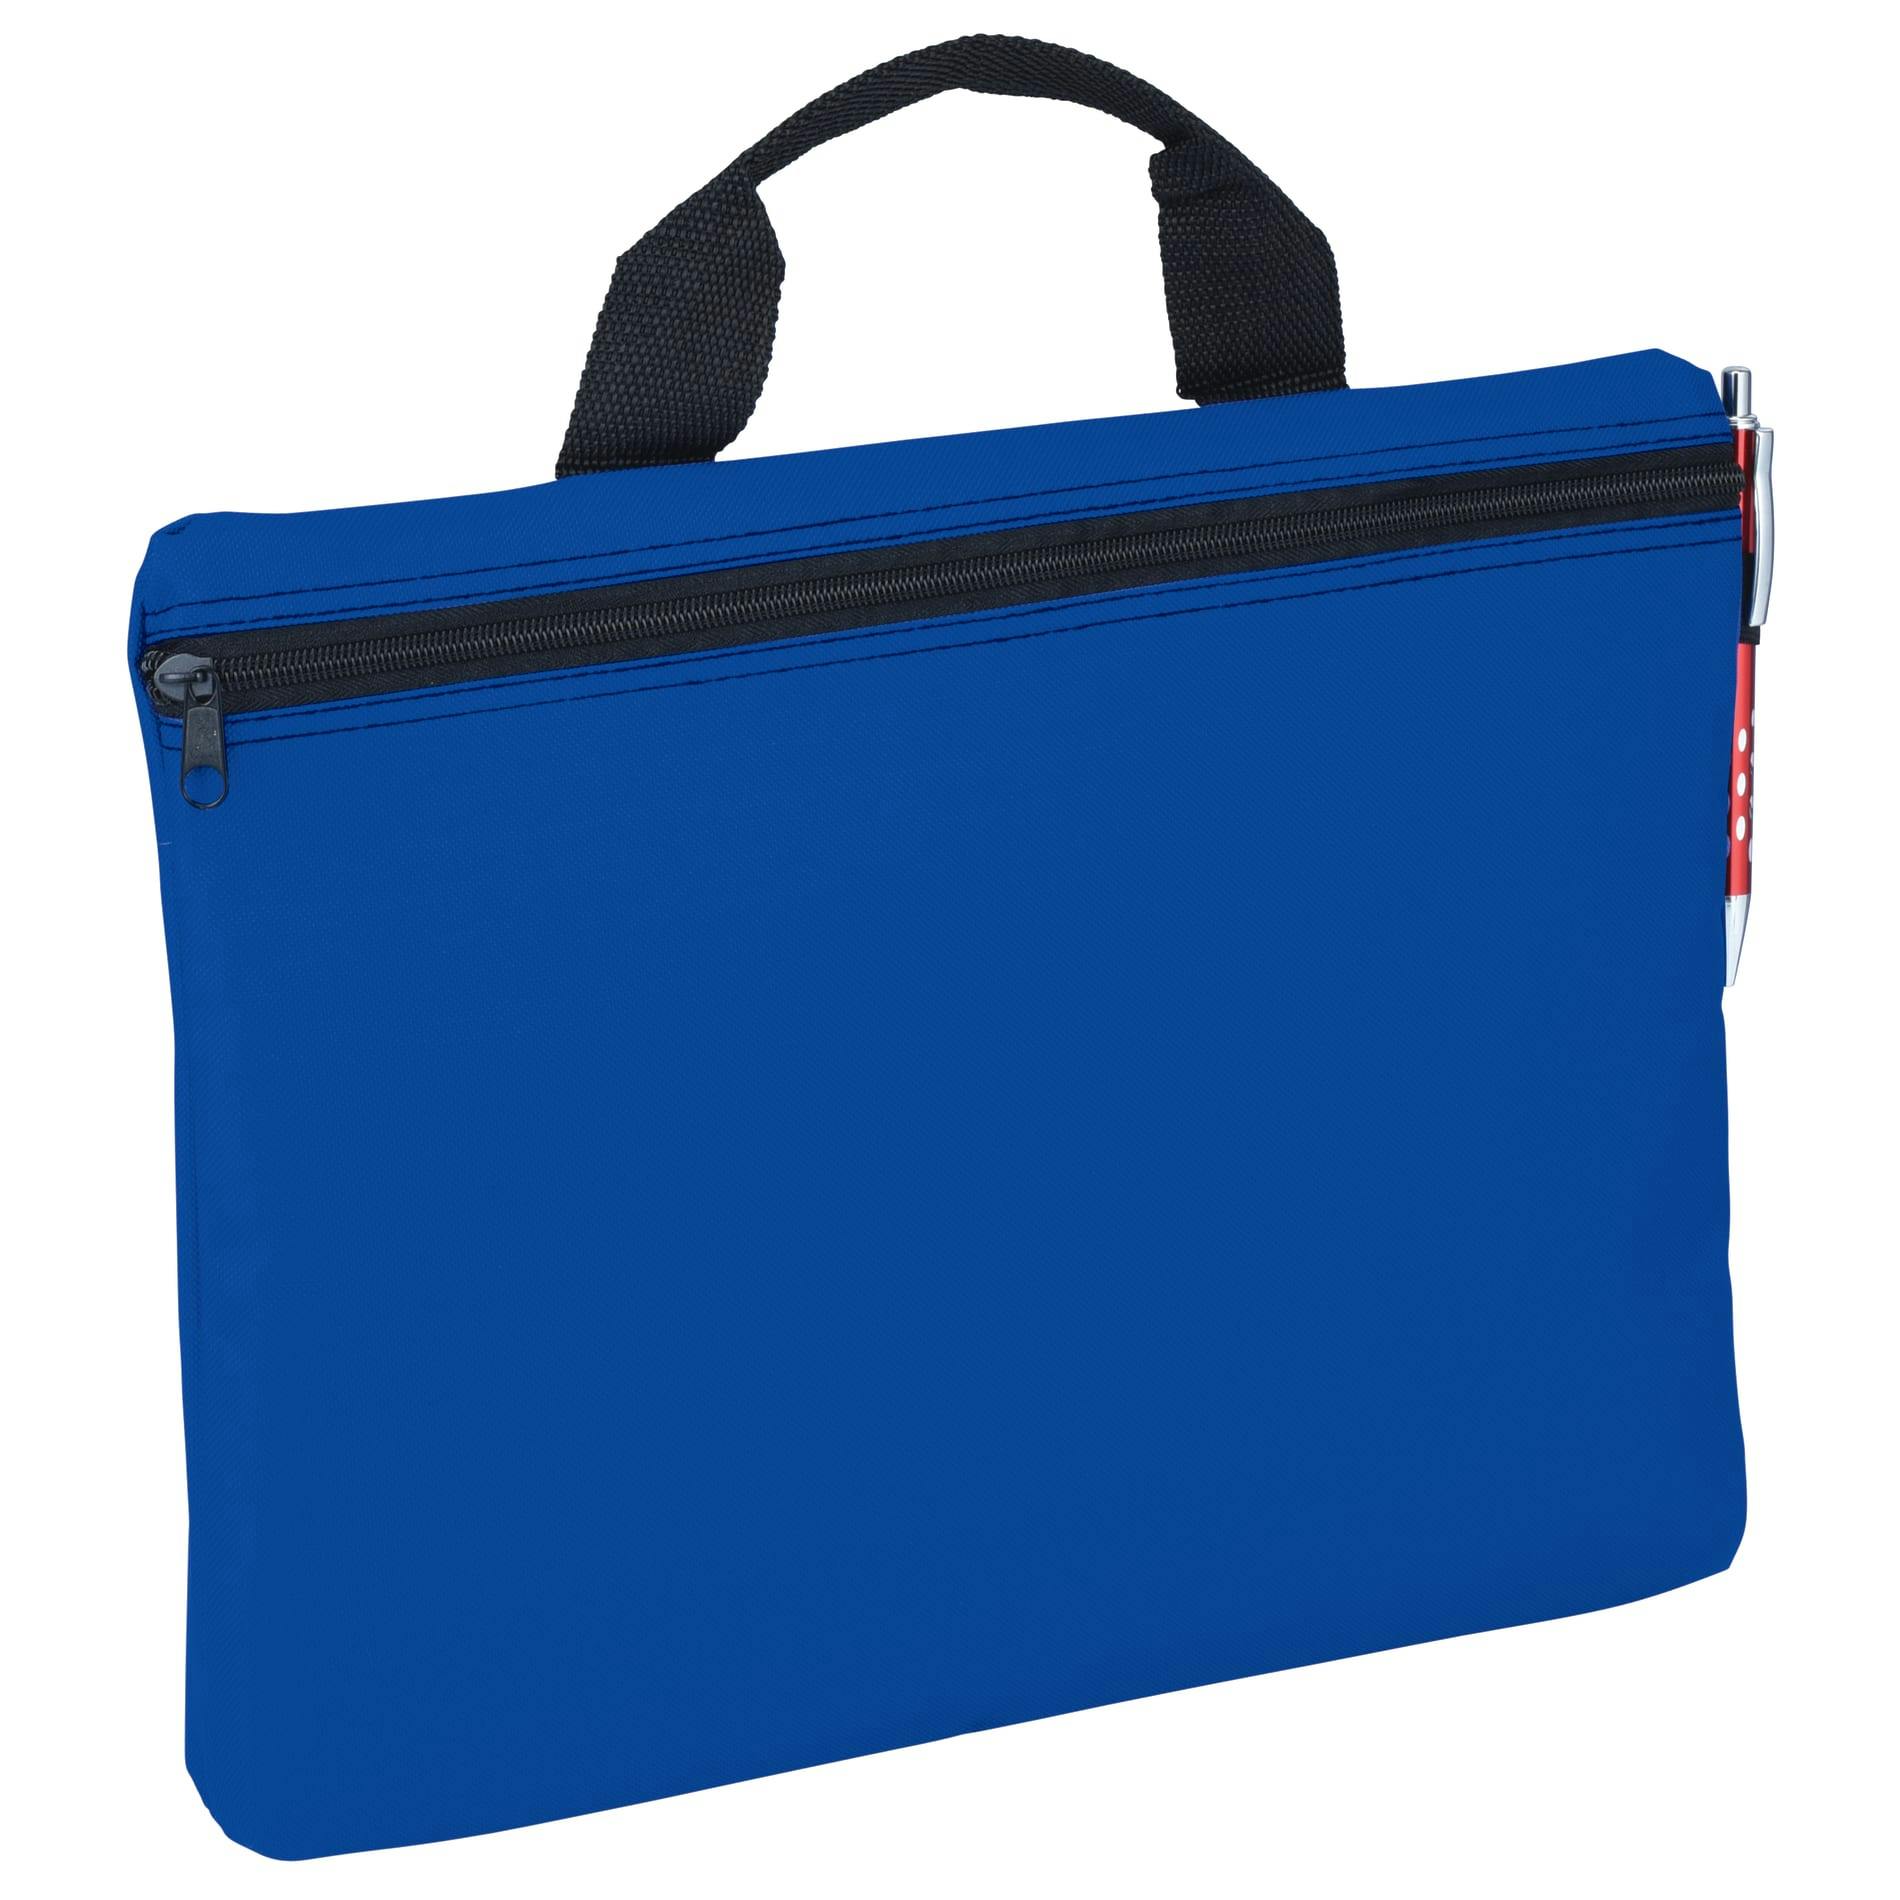 Edge Document Briefcase - additional Image 2